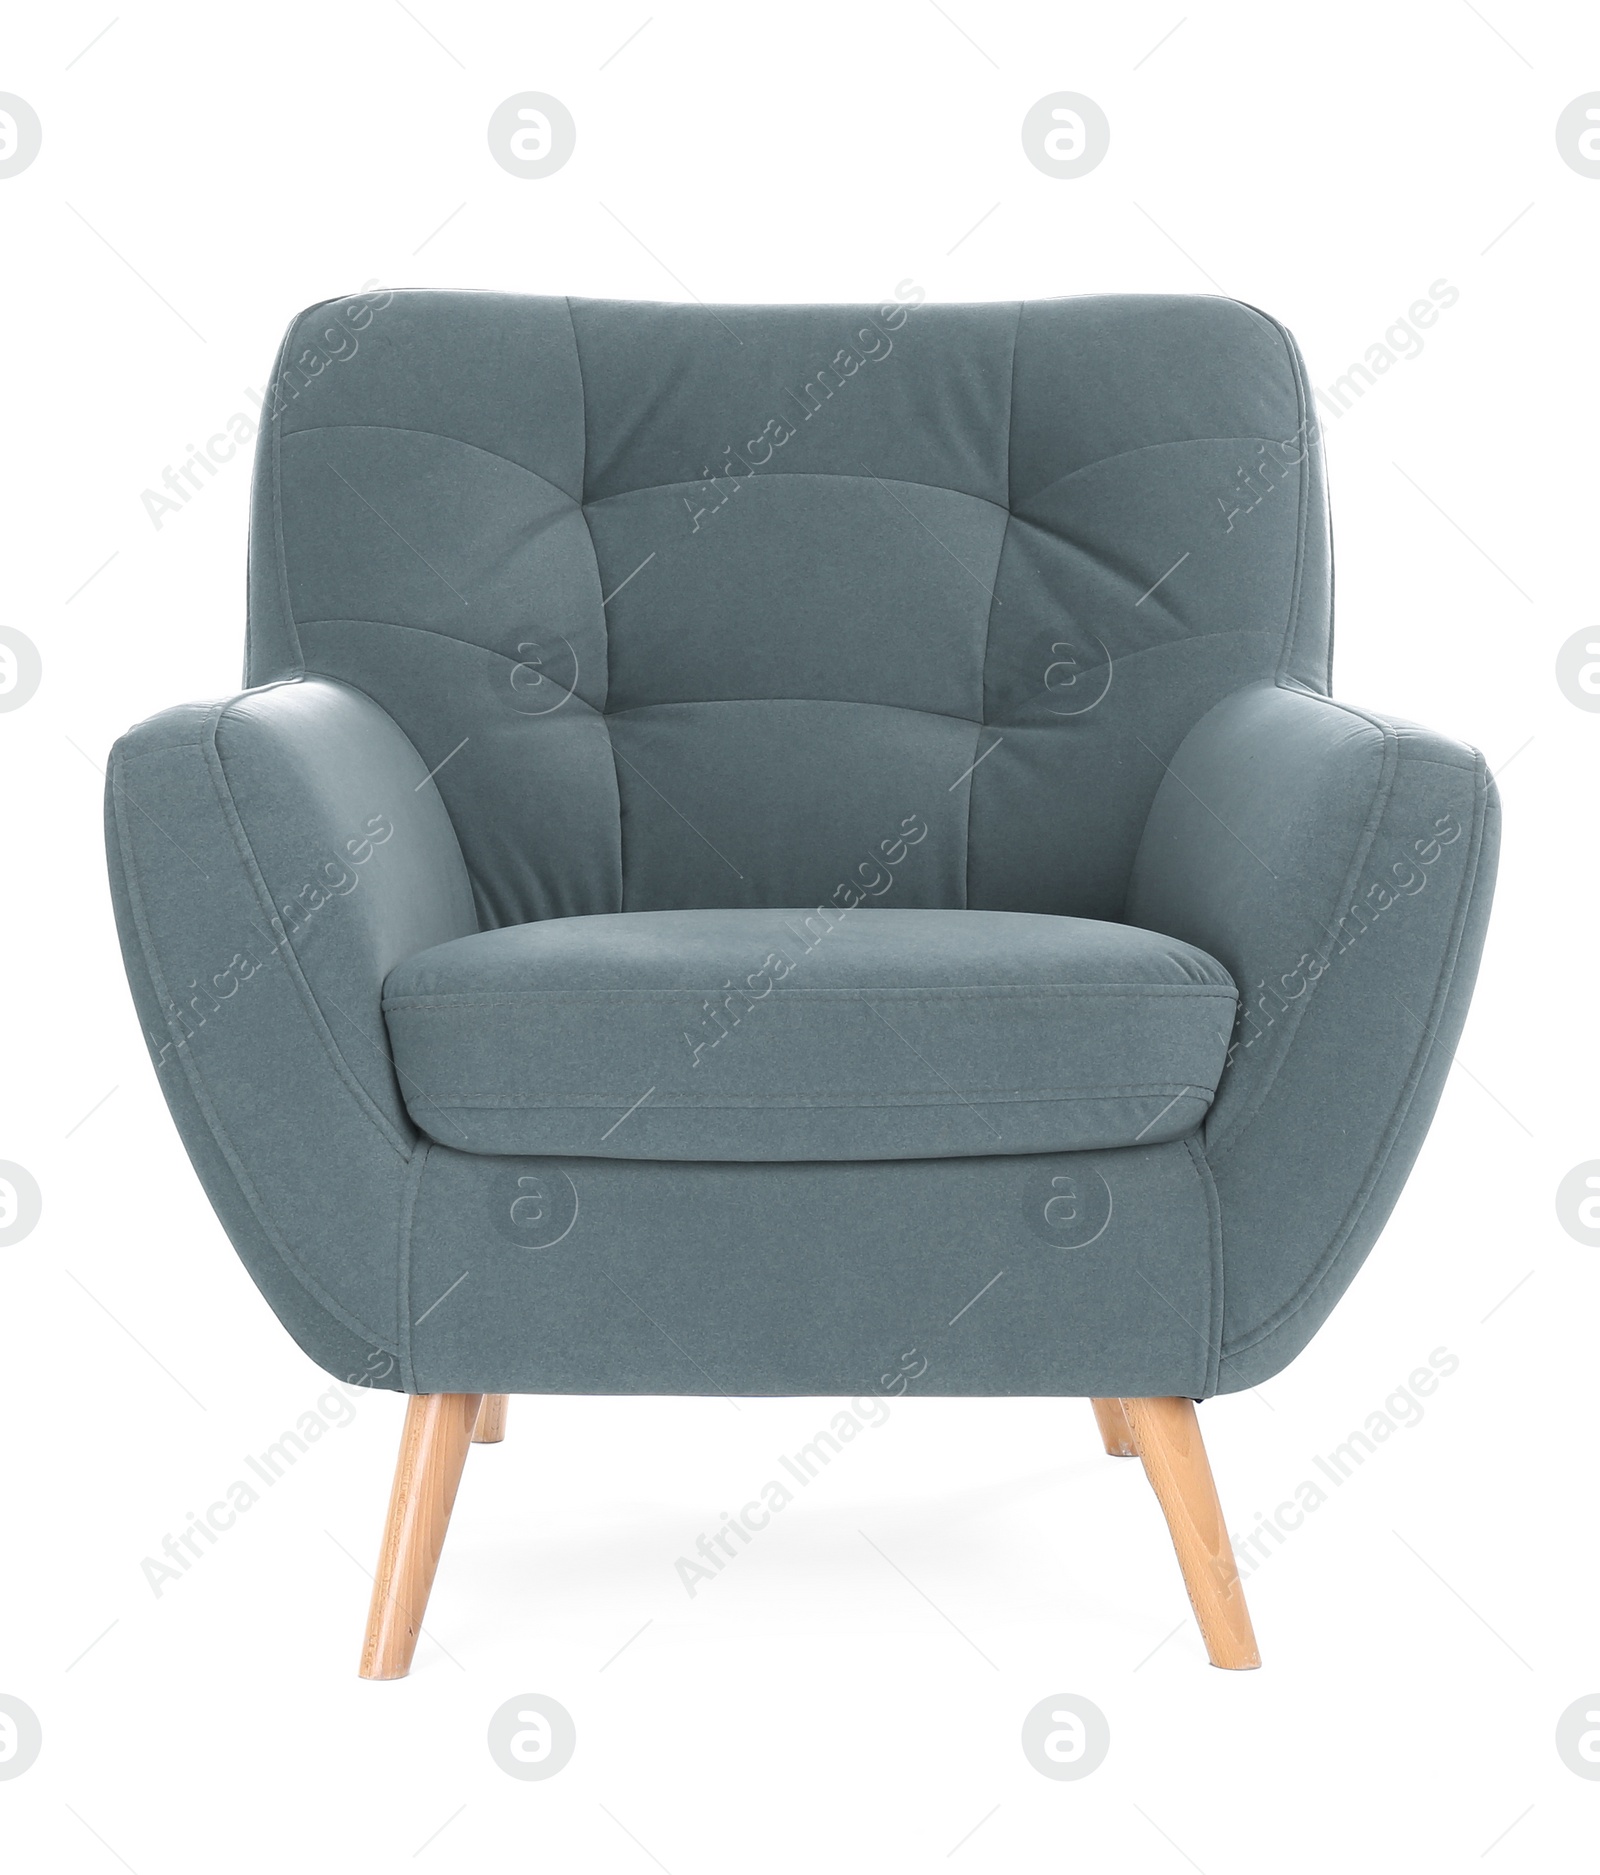 Image of One comfortable gray armchair isolated on white